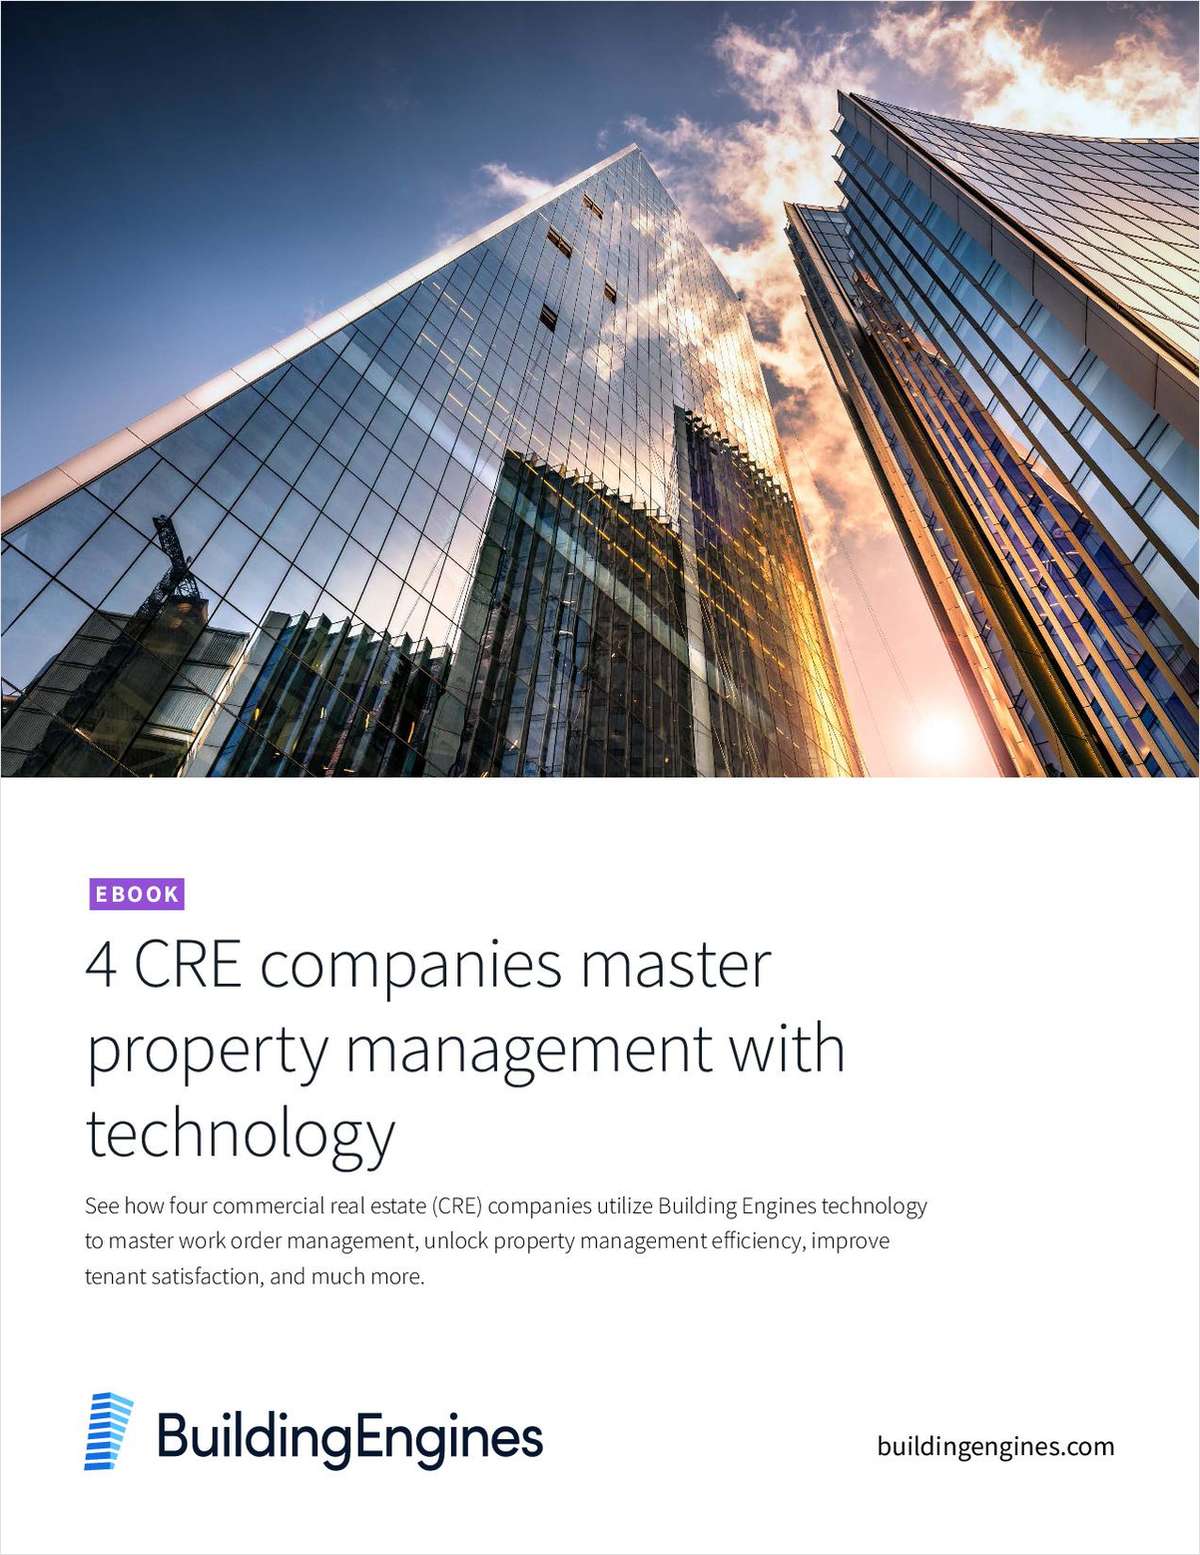 4 CRE Companies Mastering Property Management With Technology link